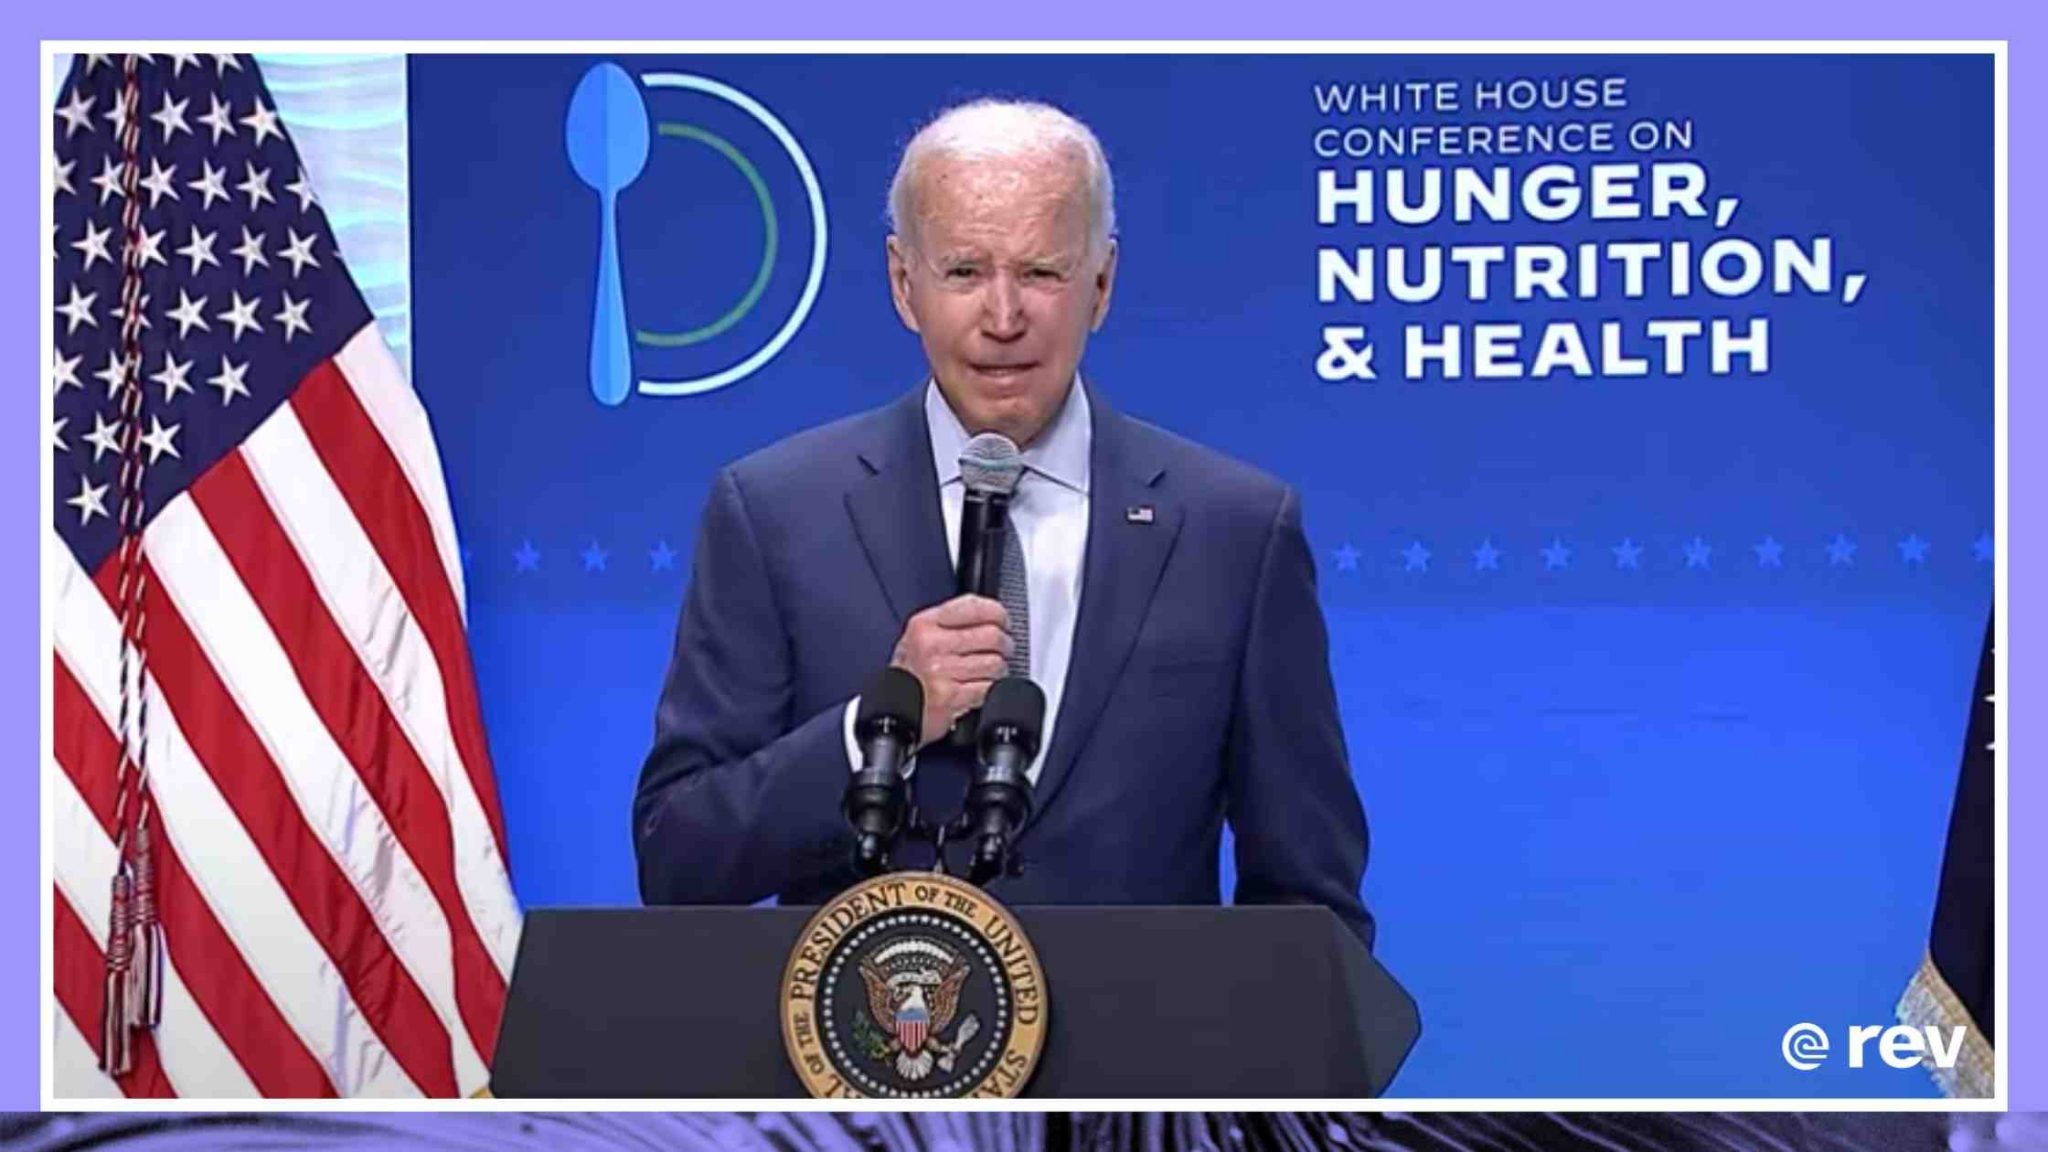 President Biden Delivers Remarks at the White House Conference on Hunger, Nutrition, and Health Transcript